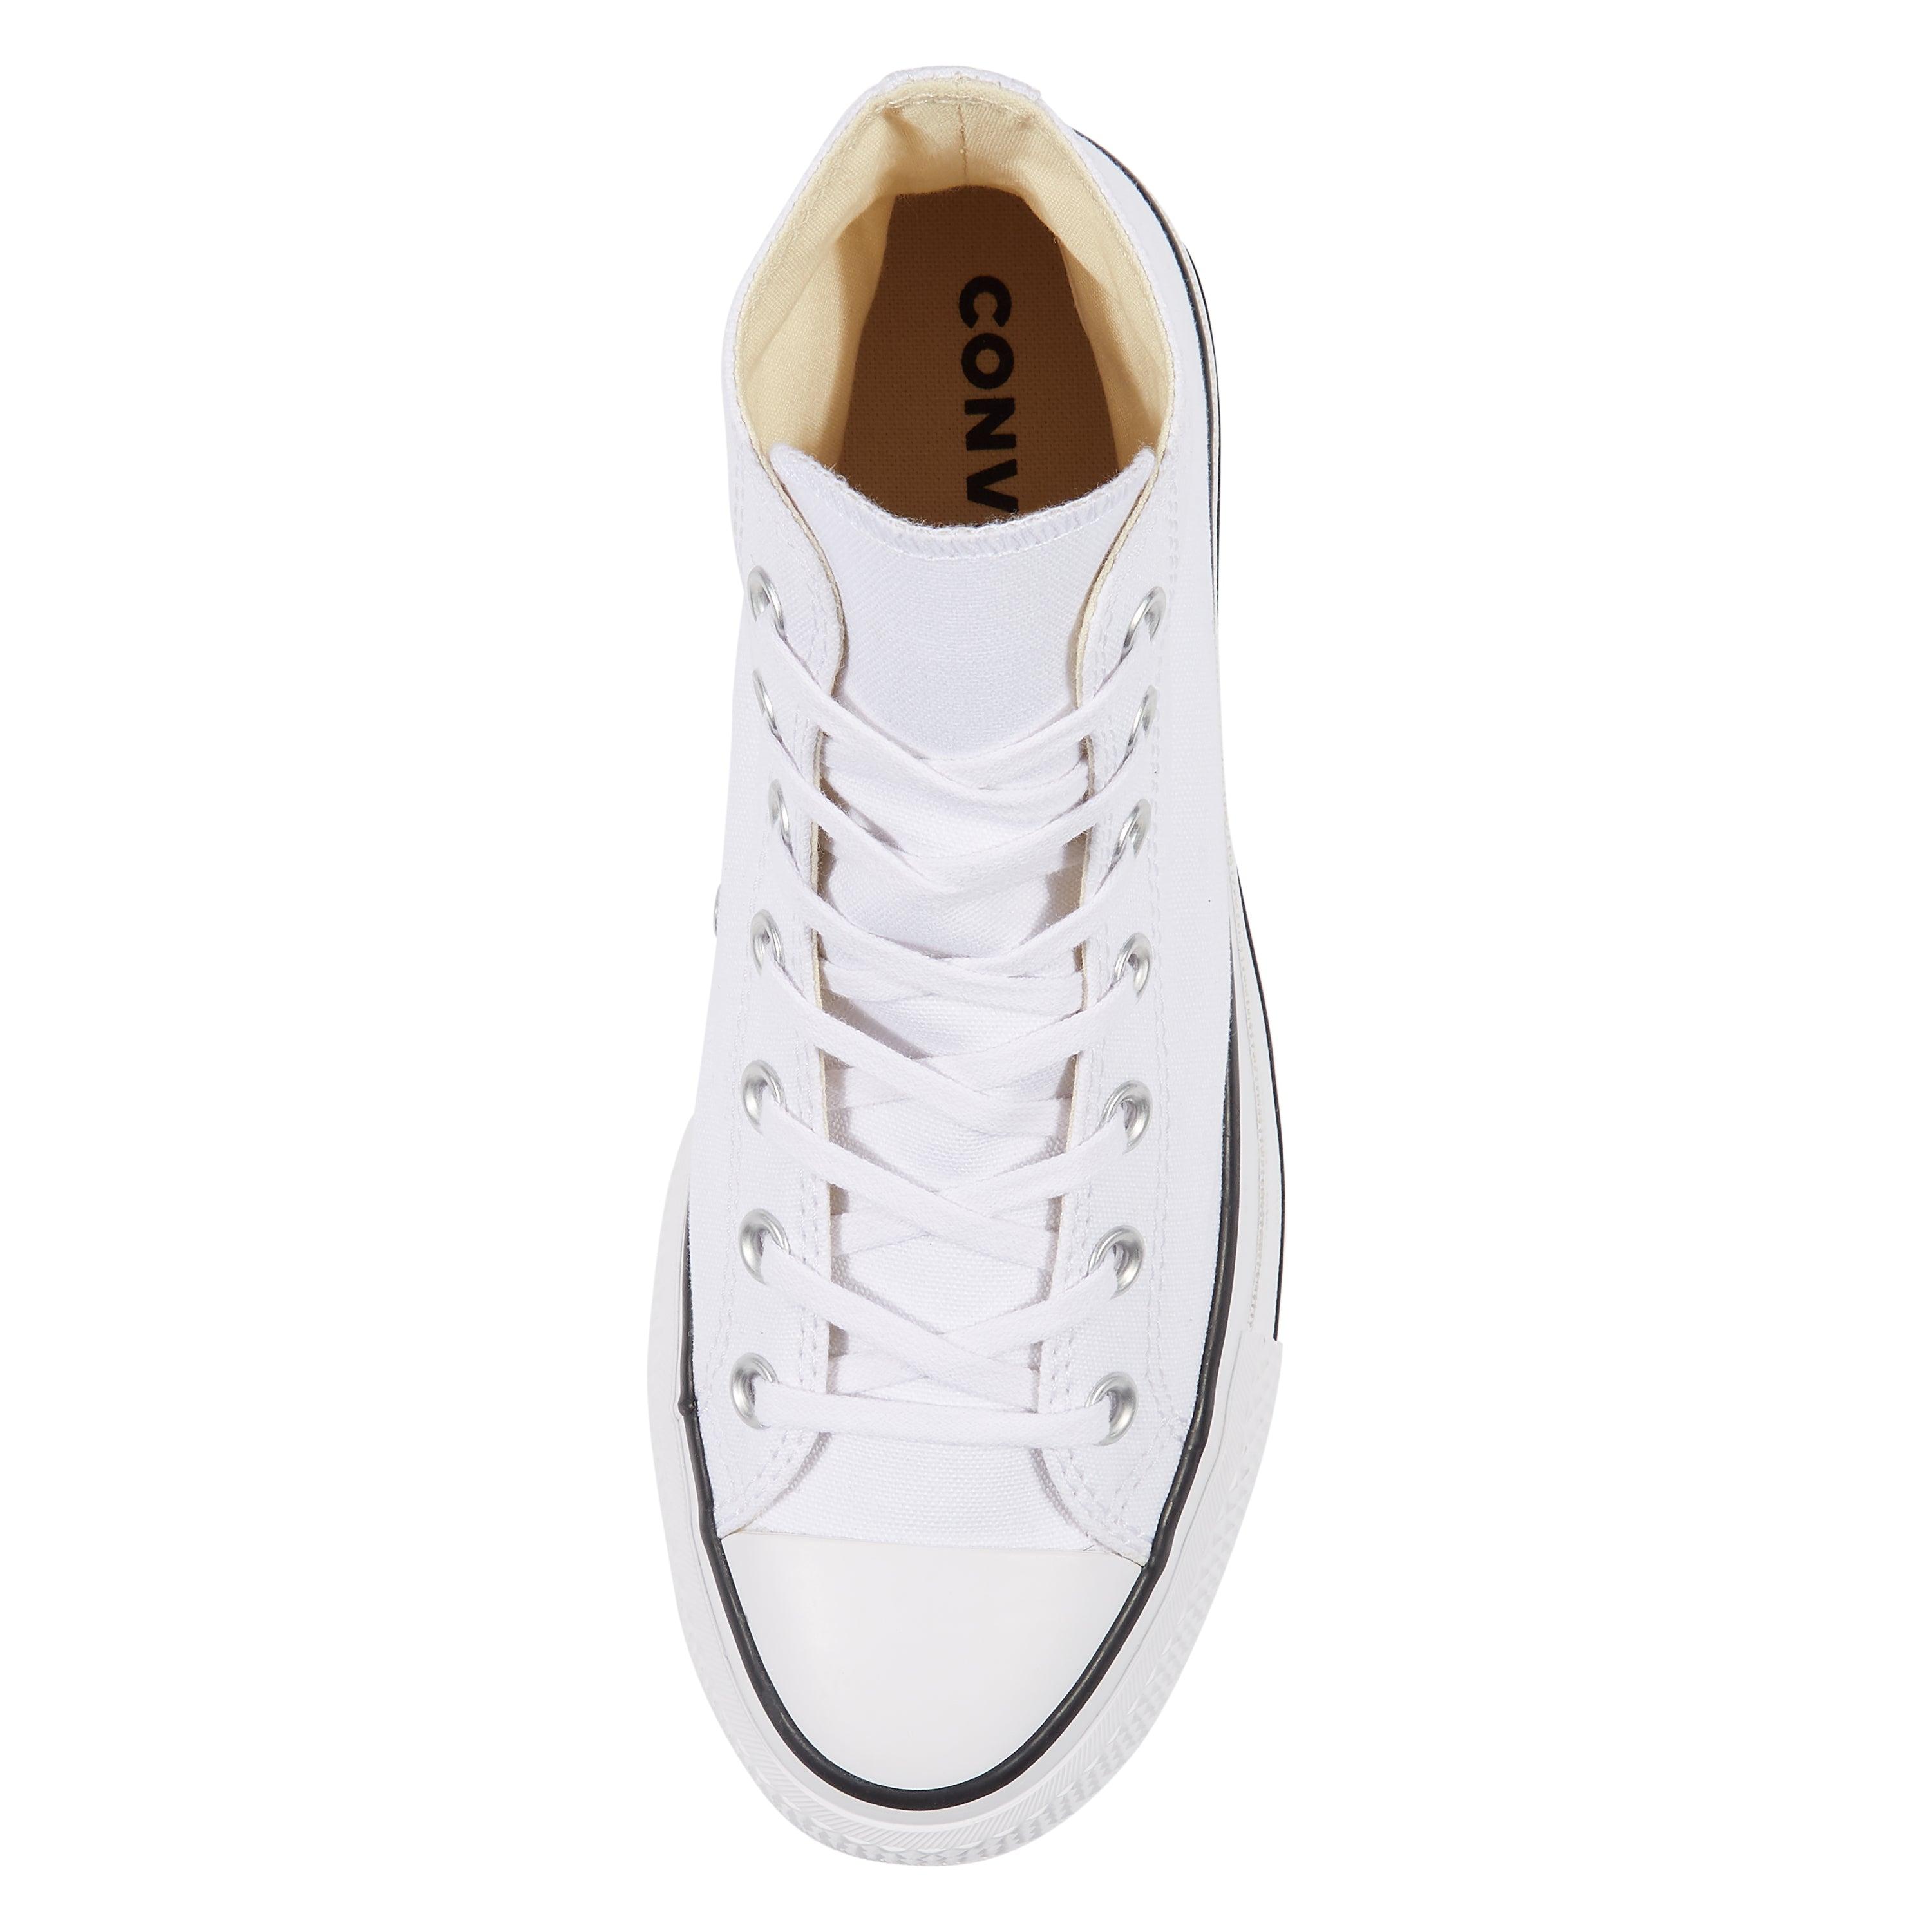 Converse Canvas Sneaker Platform Chuck Taylor Lift Bianco in White | Lyst